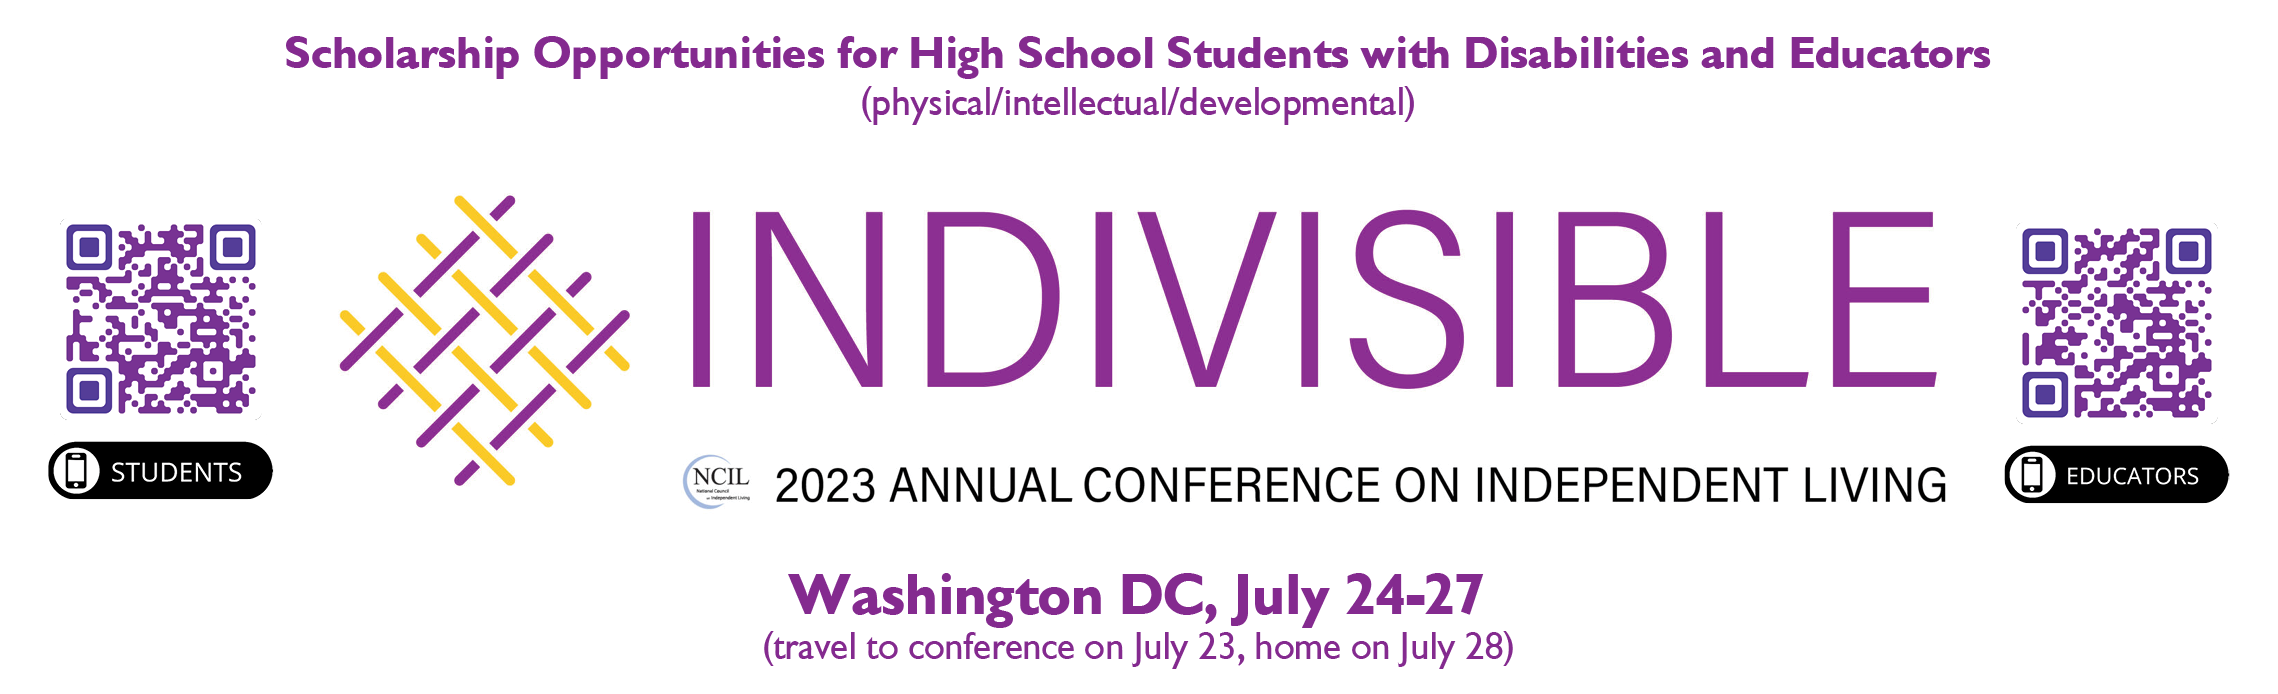 Words: Indivisible 2023 Annual Conference on Independent Living